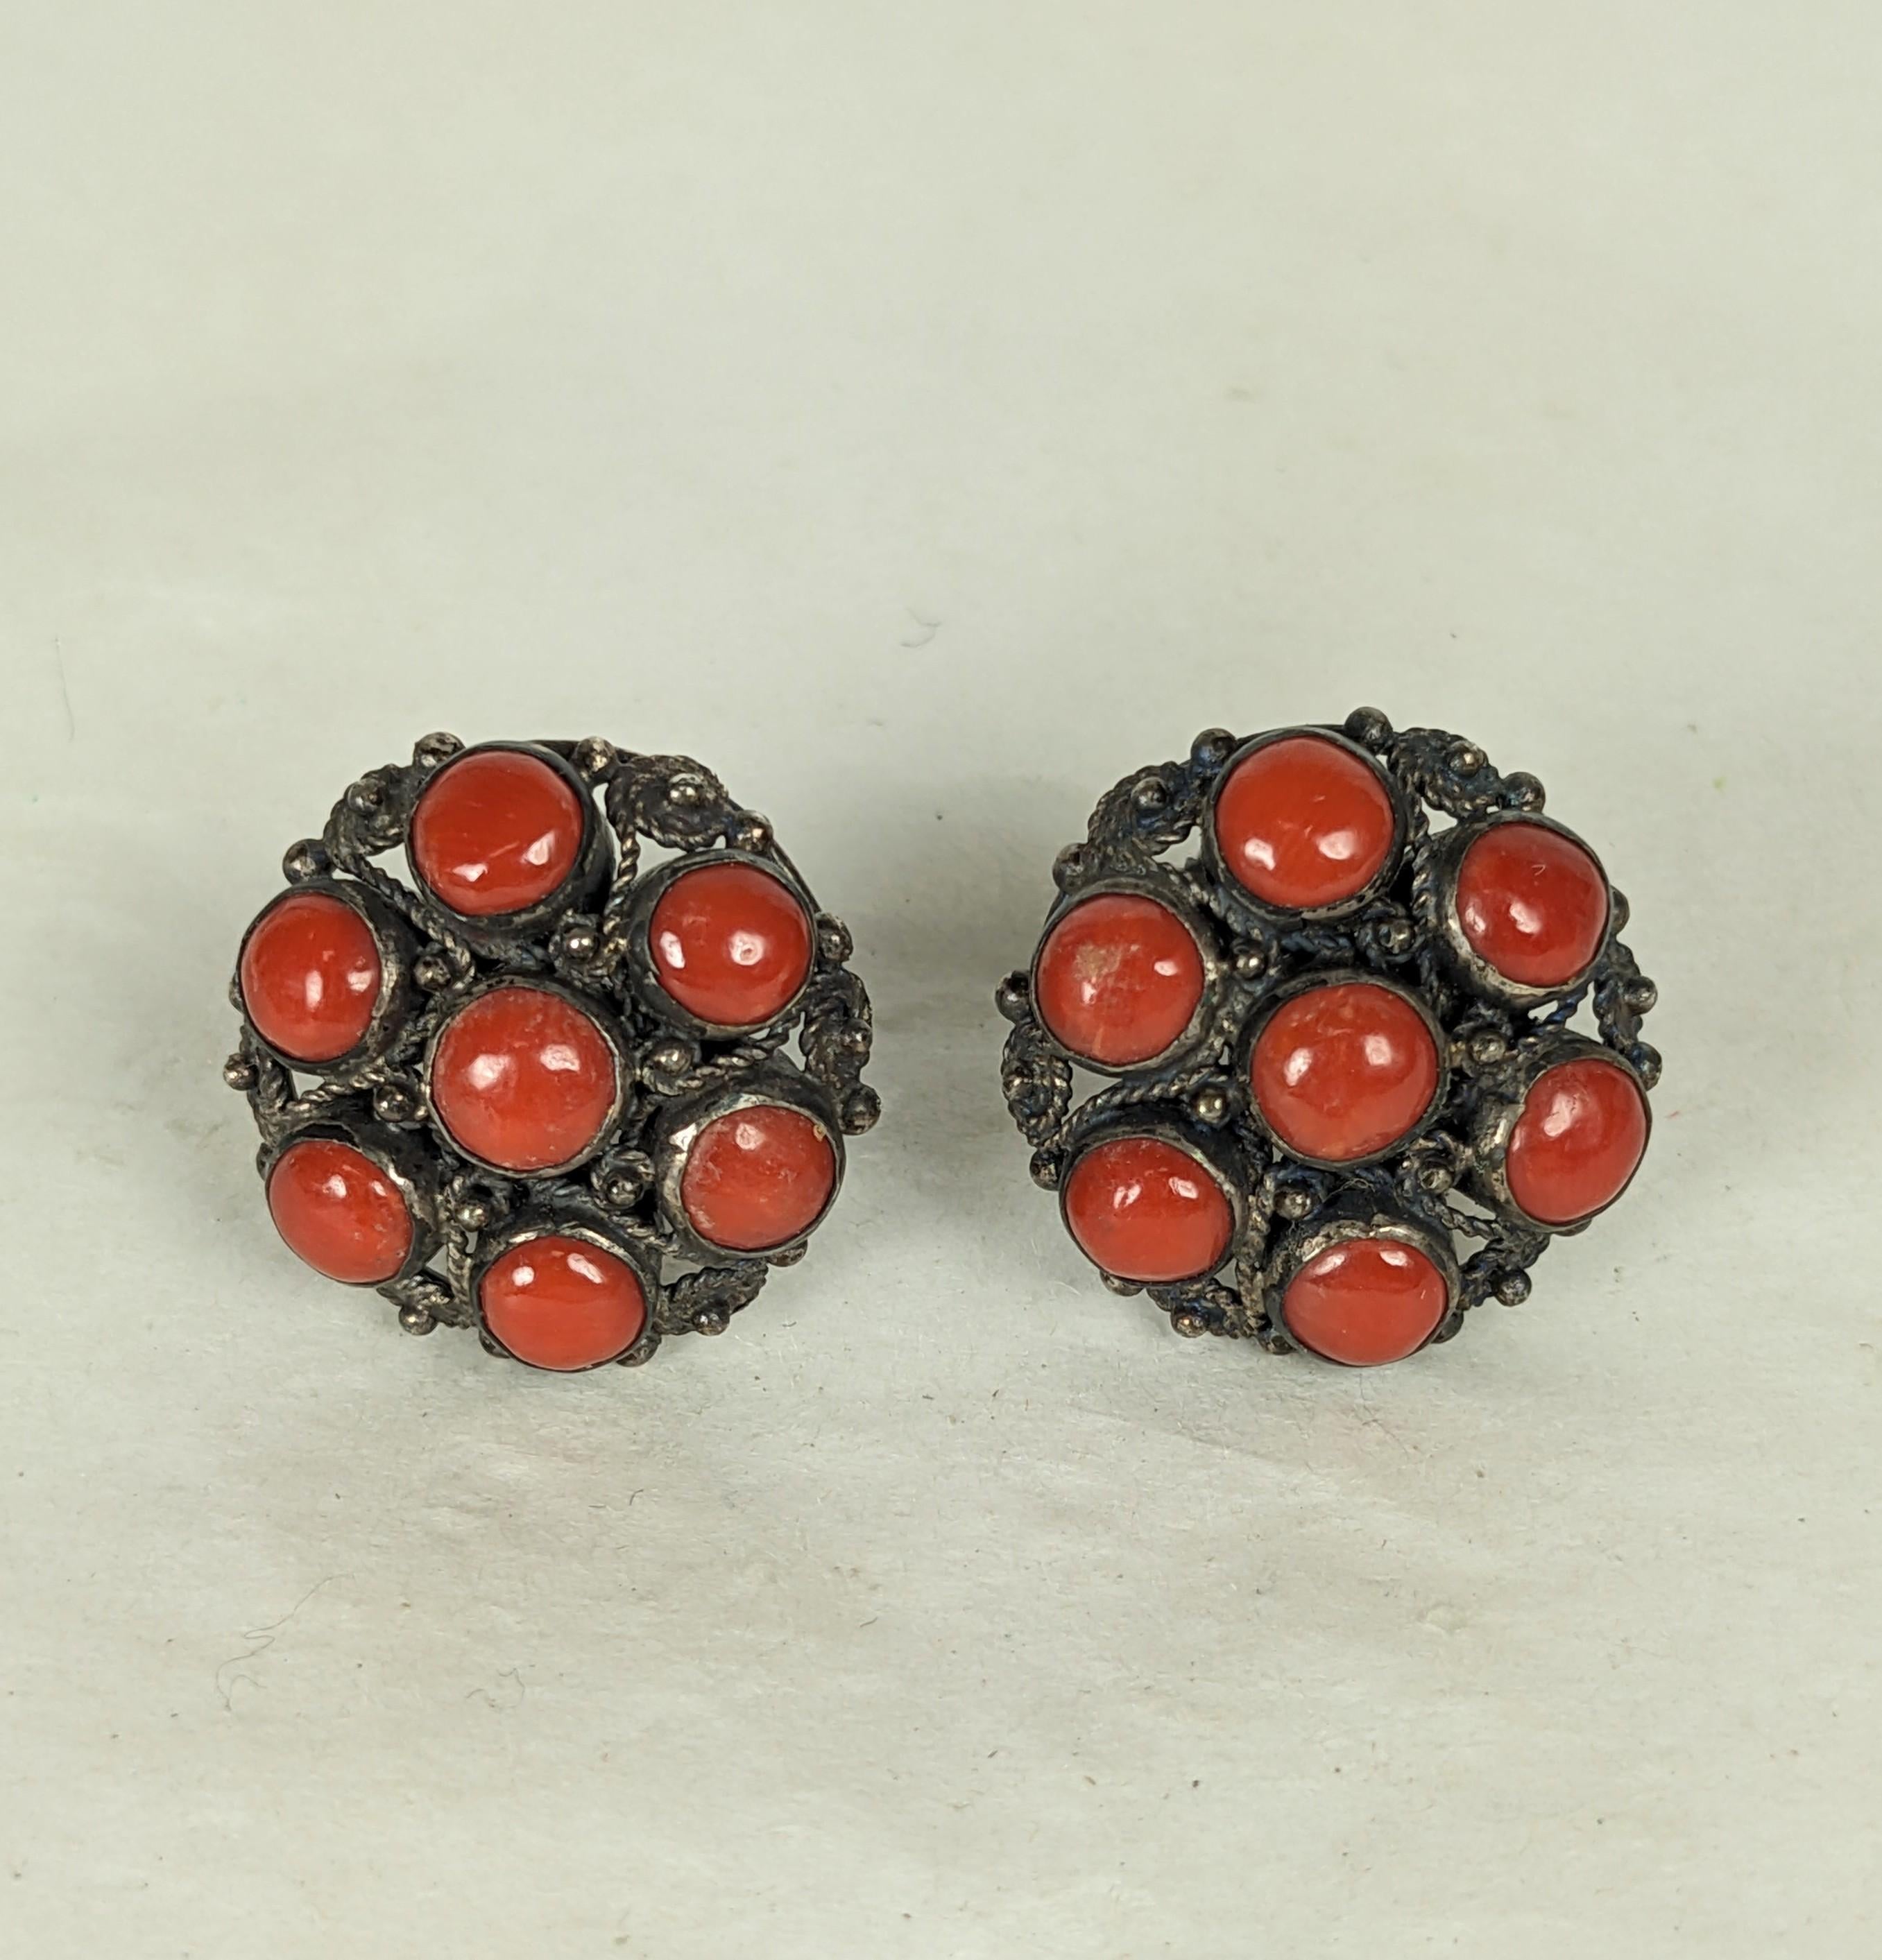 Red coral silver filigree button earclips. Of red  Sardinian coral cabocheons set in filigree wire work sterling silver, with screw back fittings. Excellent Condition. 1940's Italy. DOMESTIC SALES ONLY.
Length .75